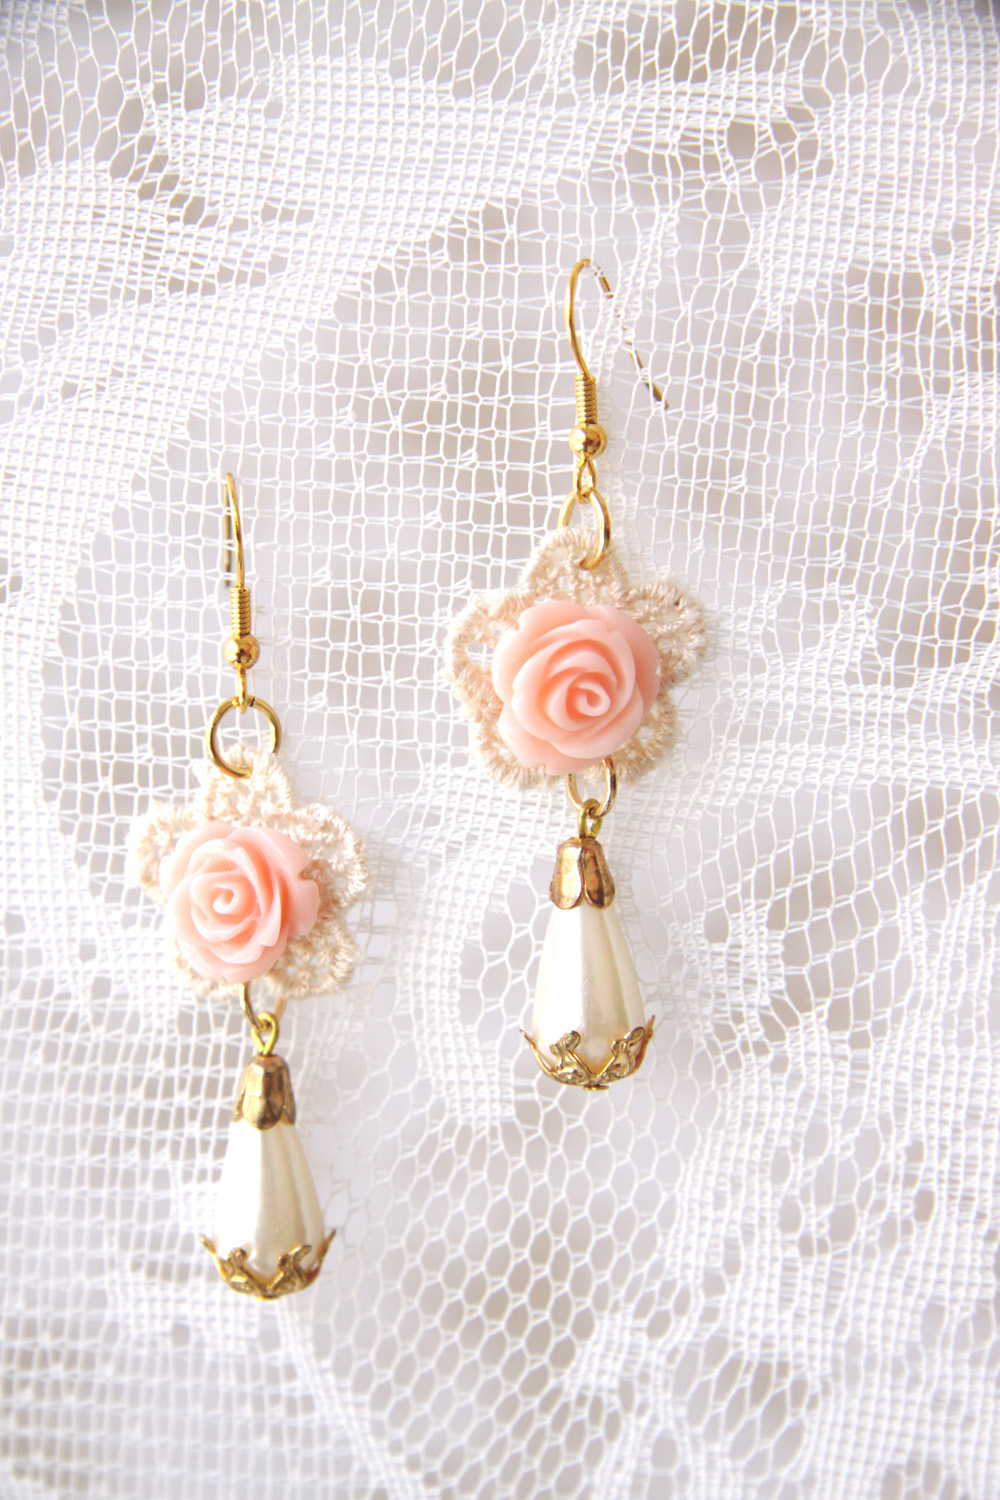 Bogo -lace Earrings With A Pink Rose - Bridal Earrings